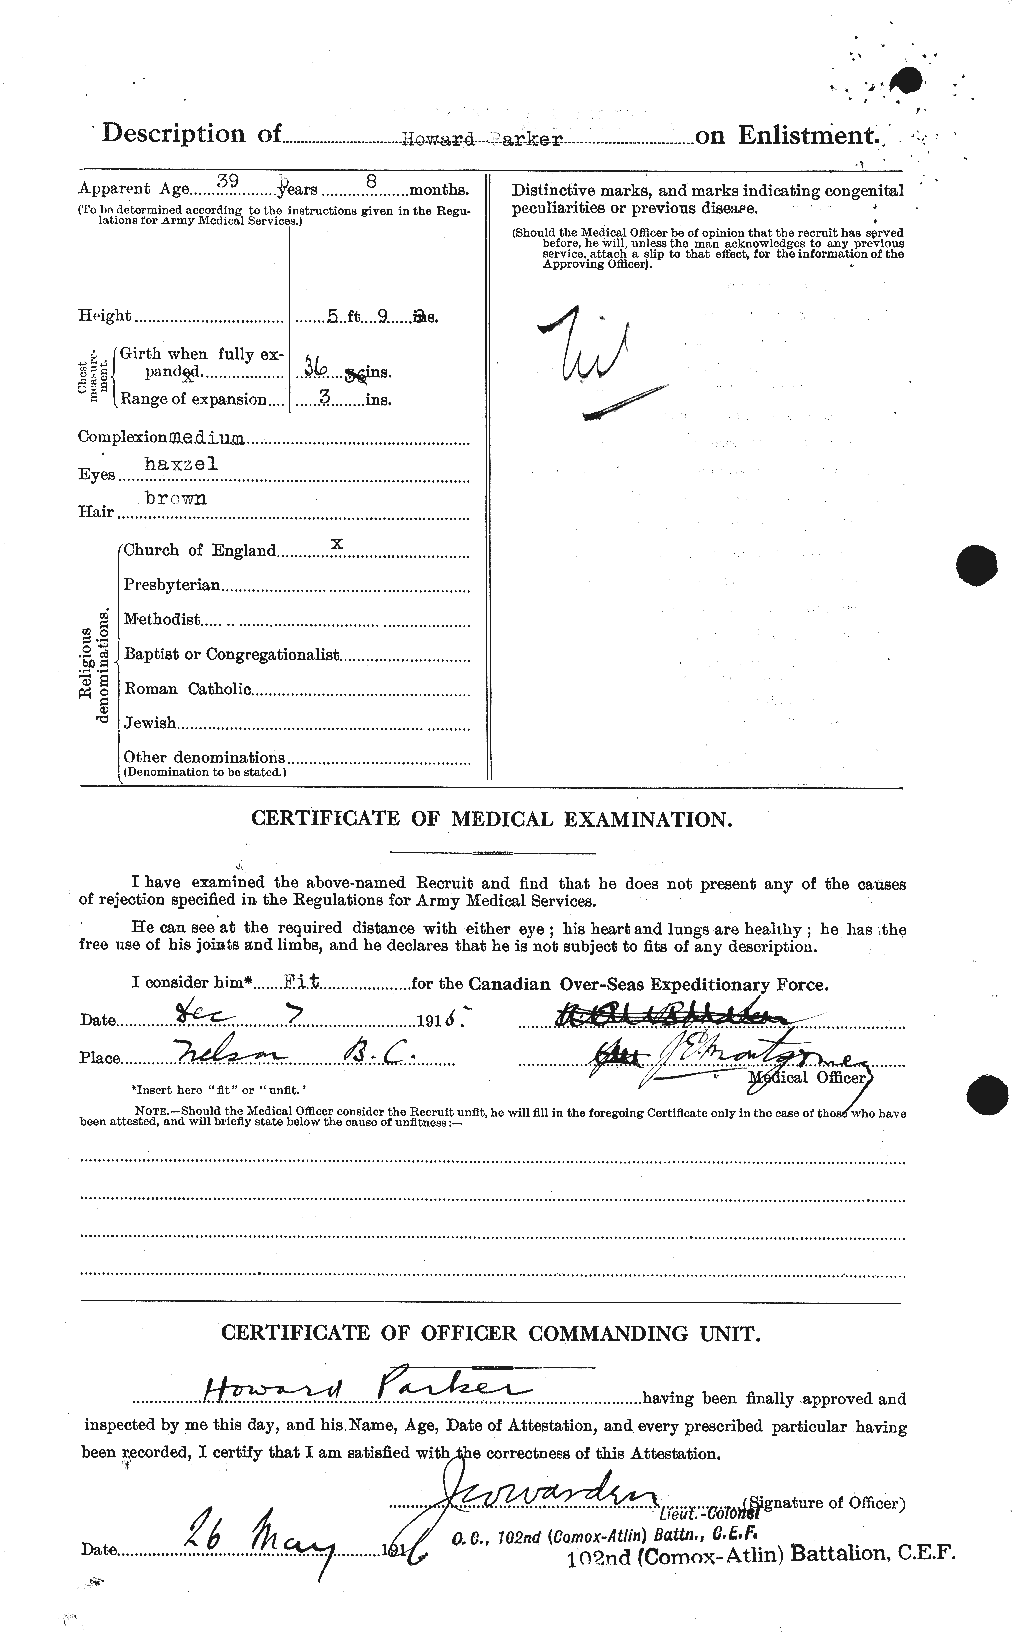 Personnel Records of the First World War - CEF 565387b